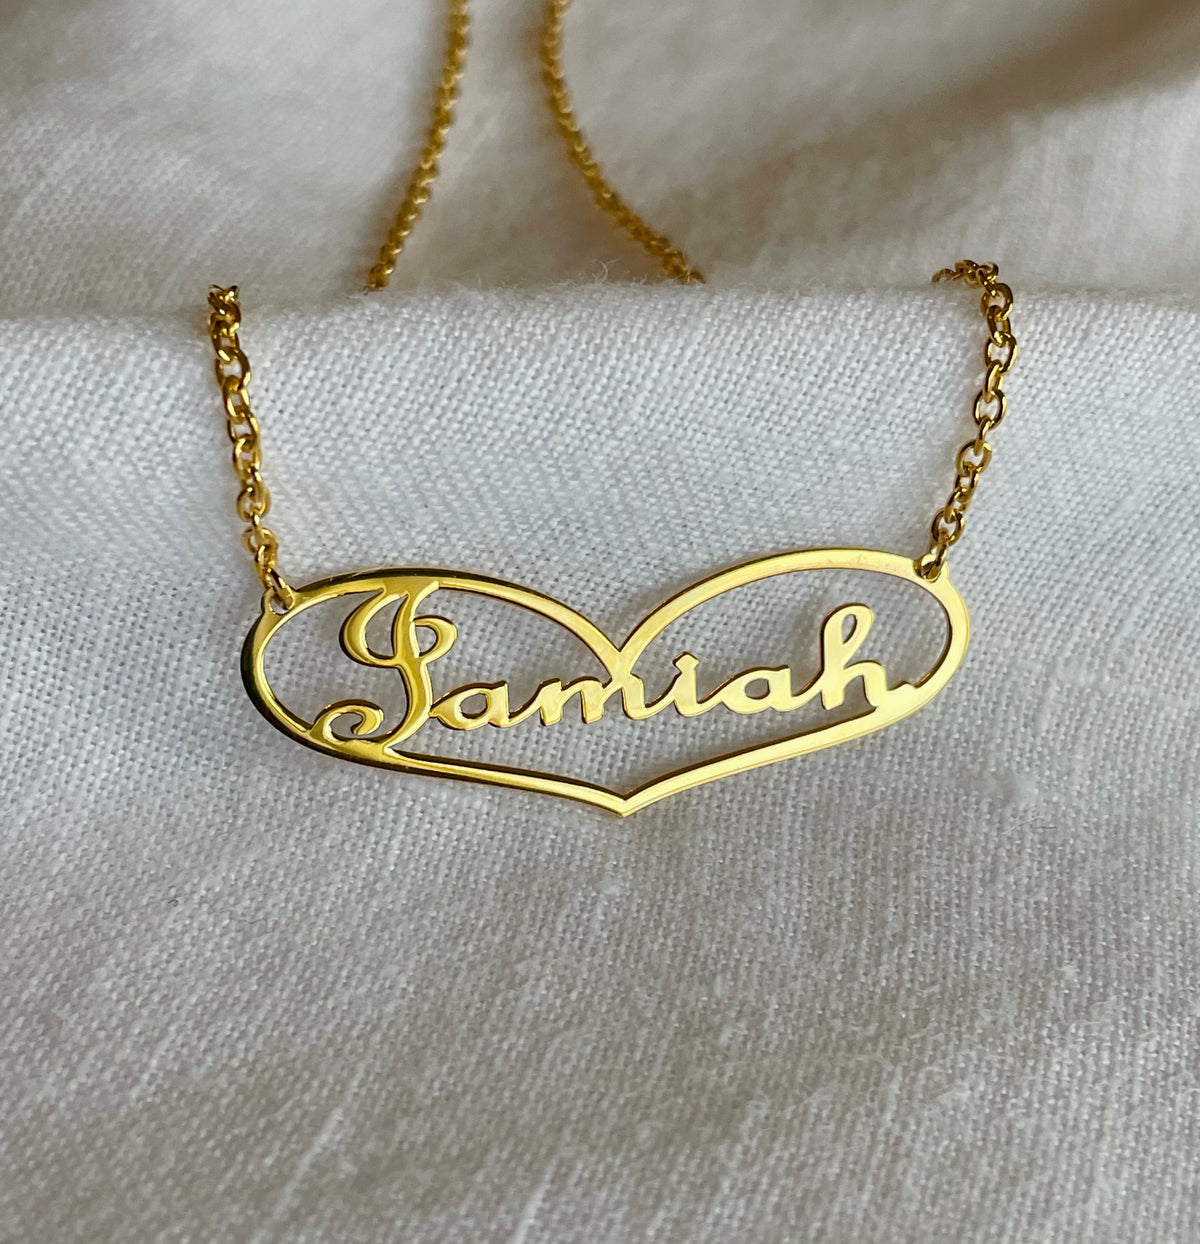 Heart Nameplate Personalized Necklace w/ 18 inch Necklace - Small Size 1.25 inches wide (Up to 10 Characters)